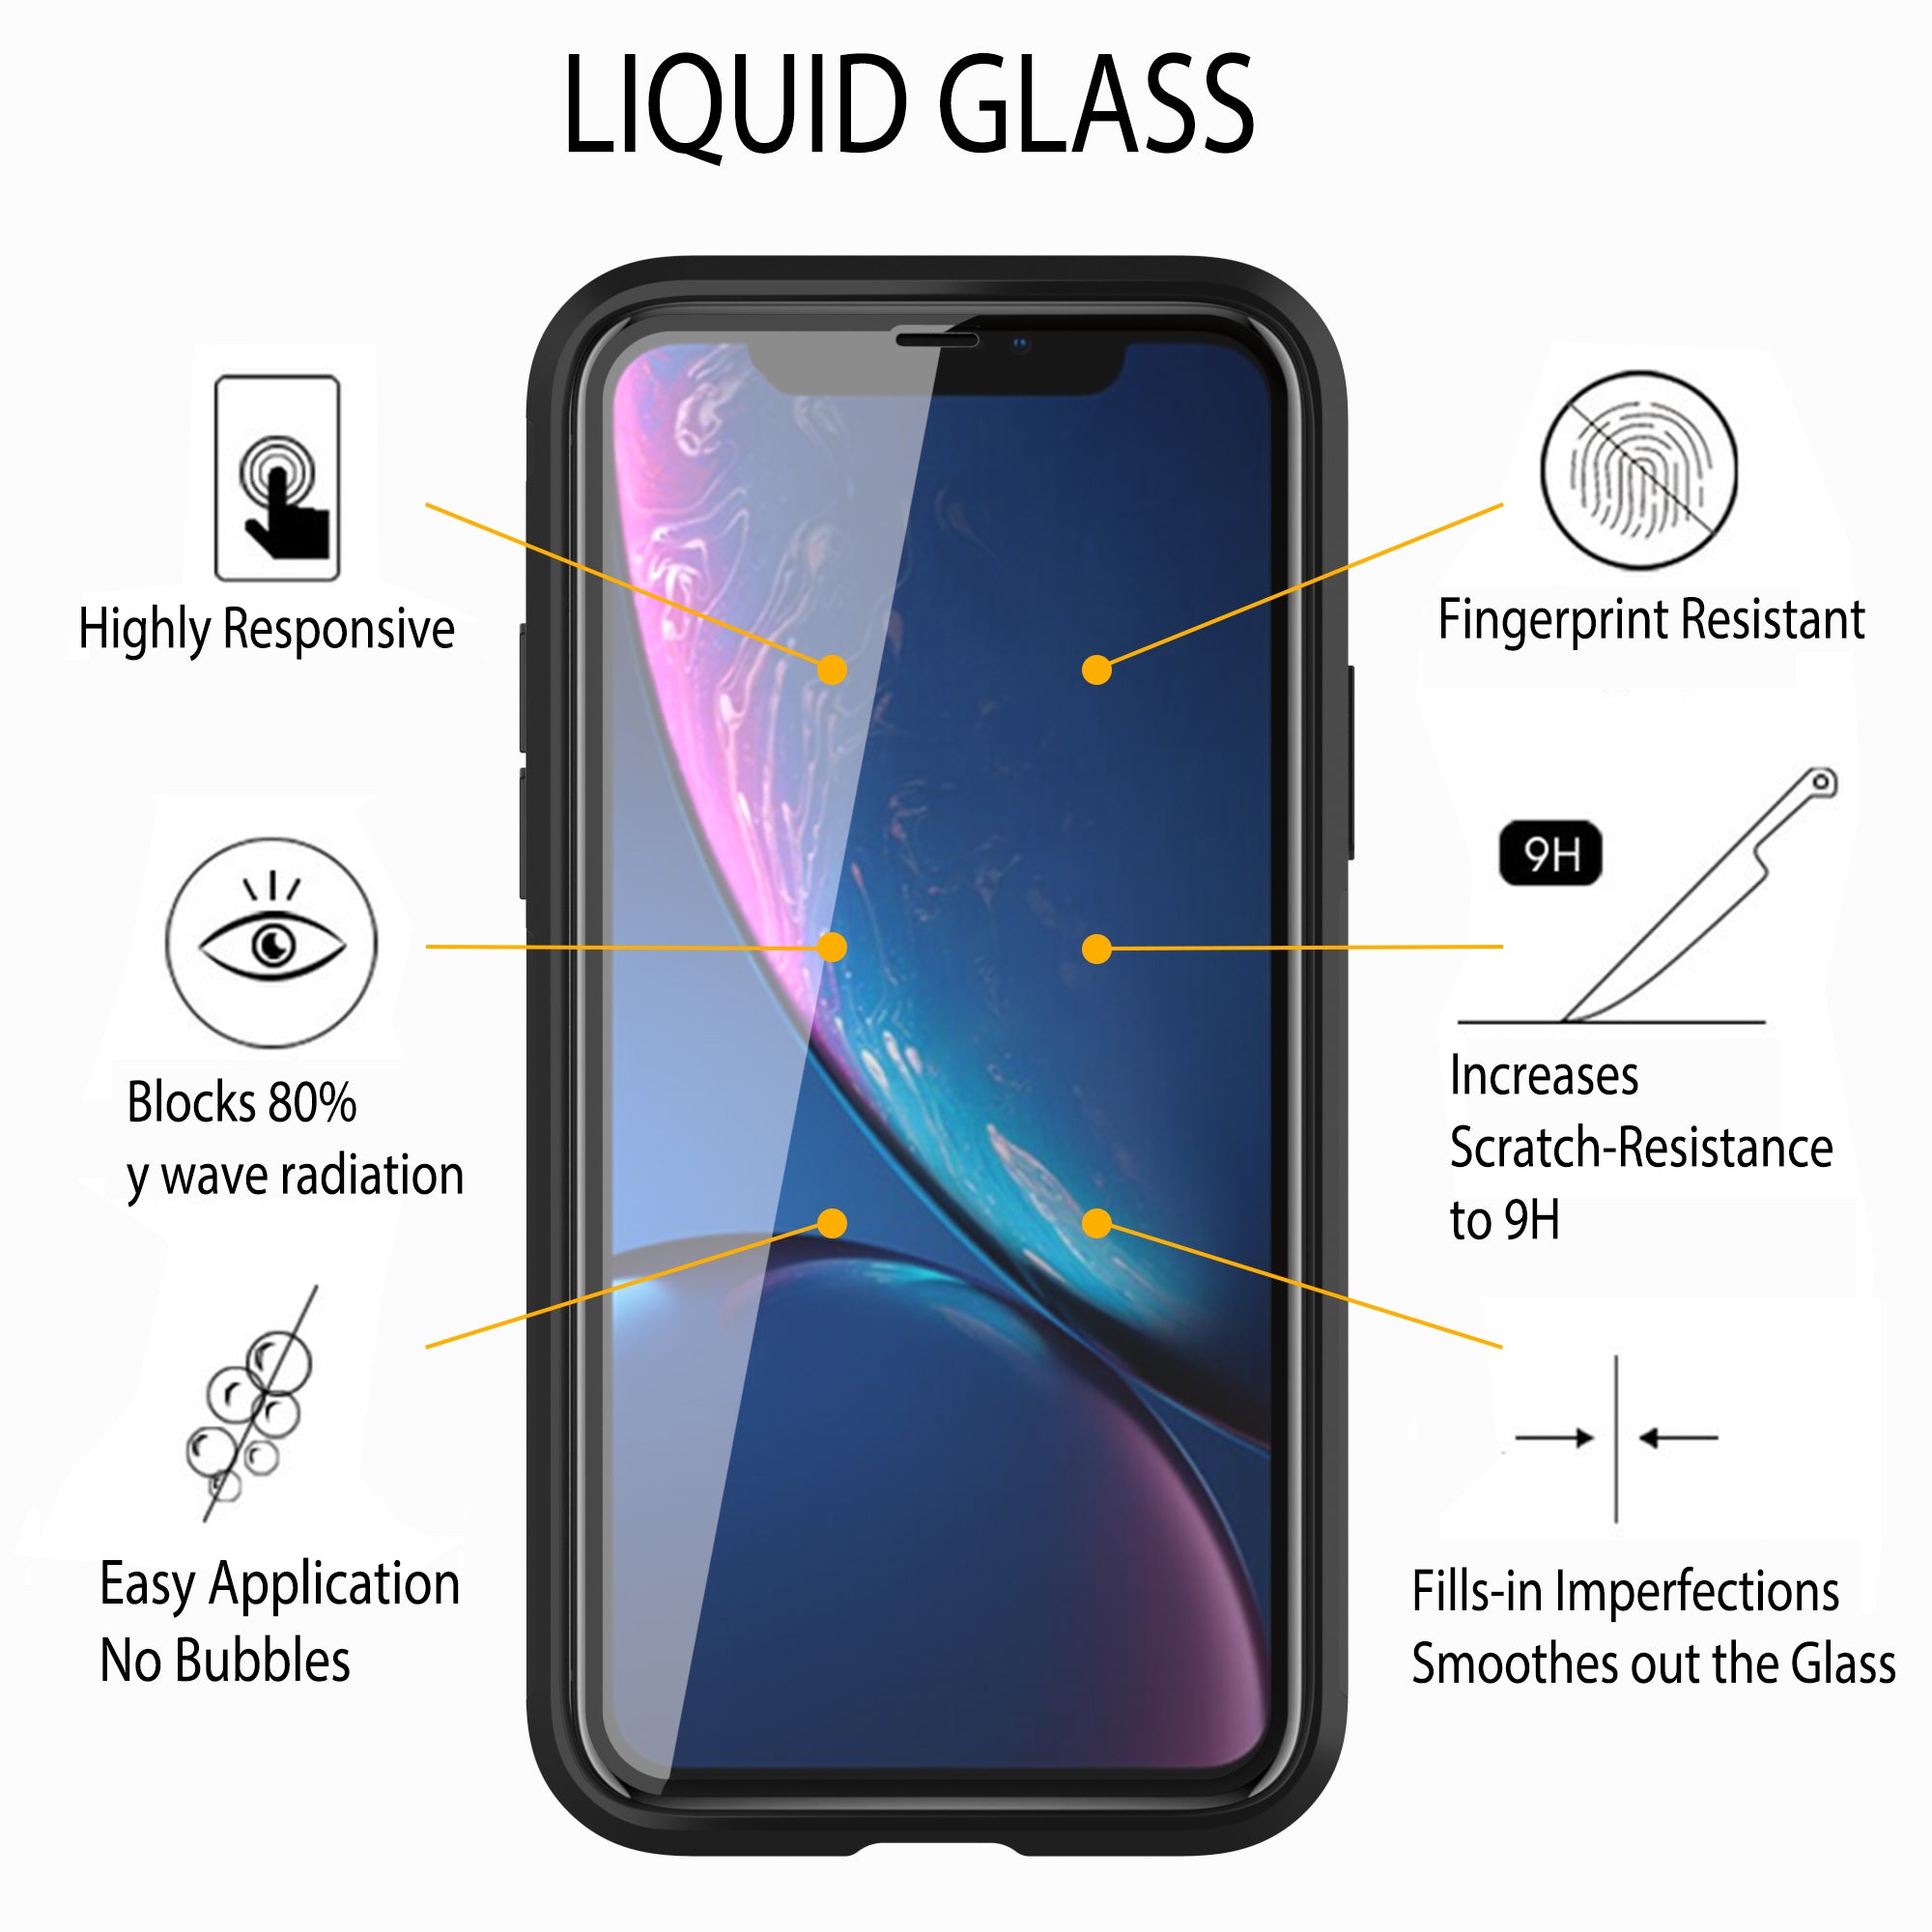 Liquid Glass Screen Protector Universal for All Phones Tablets Watches -3Pk